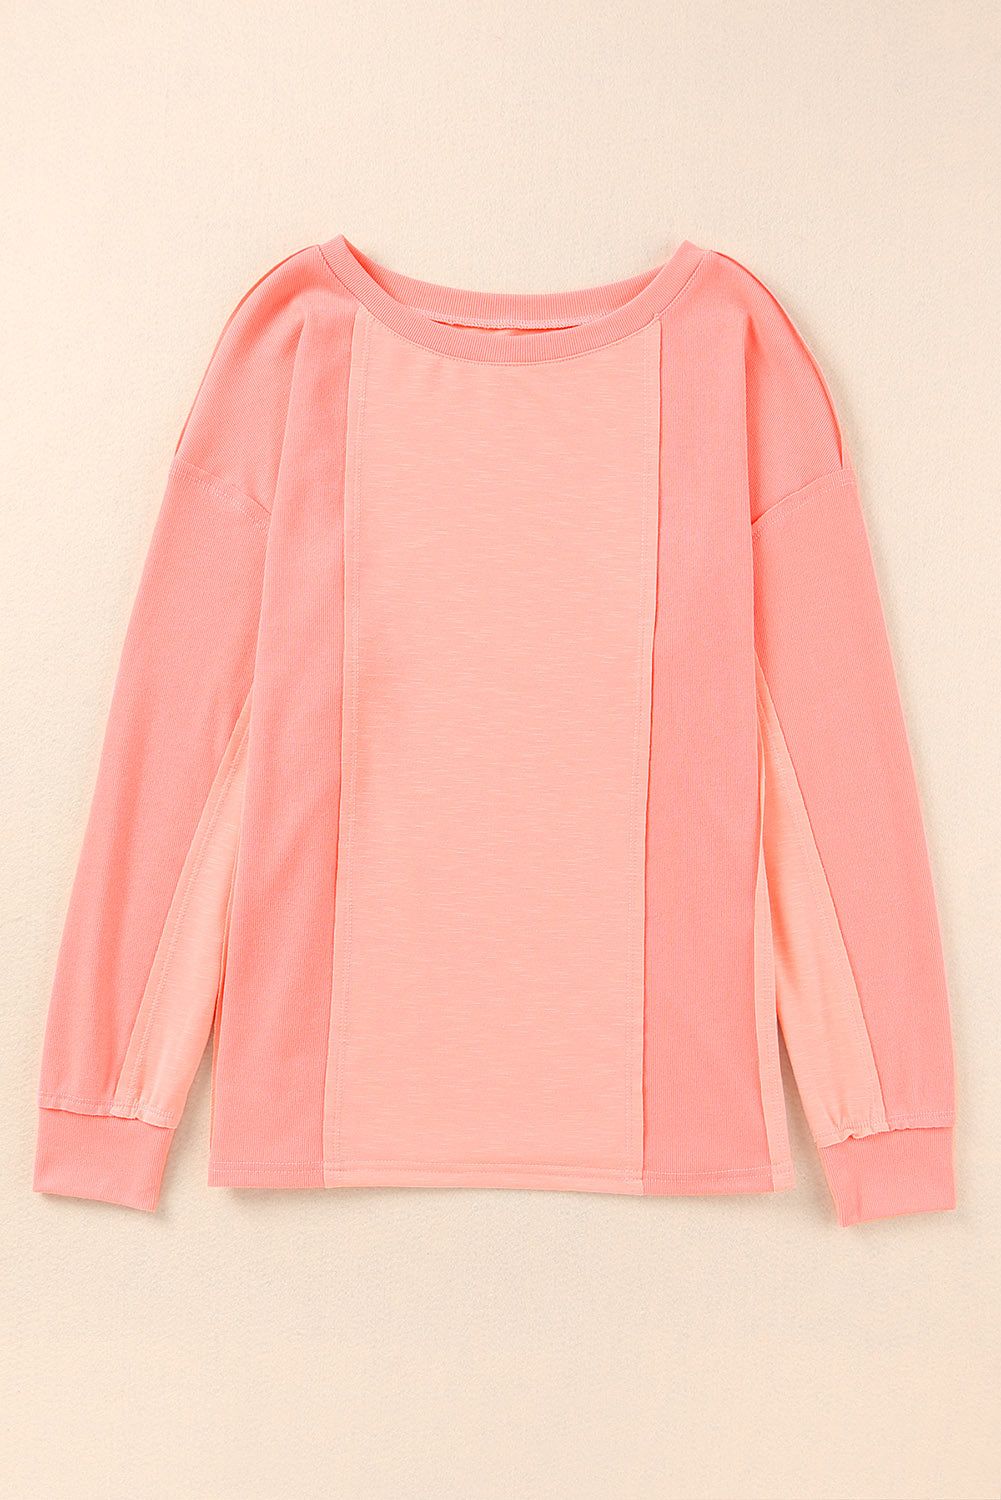 Pink Solid Color Patchwork Long Sleeve Top